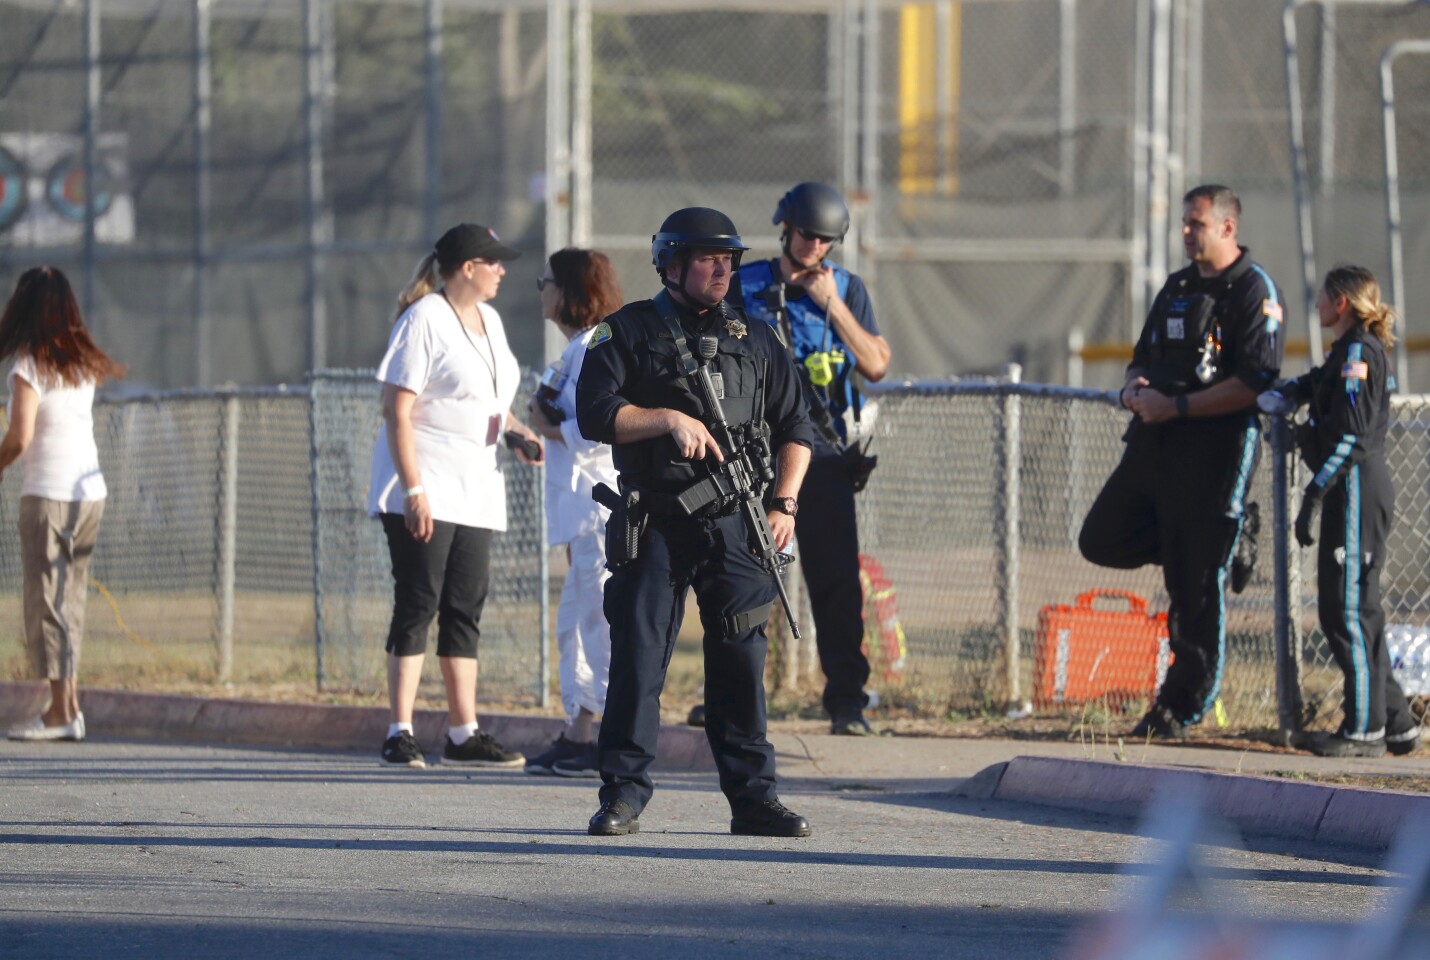 A police officer stands guard outside Gilroy High School soon after the July 28 mass shooting that occurred at a nearby festival site.(Nhat V. Meyer / Associated Press)